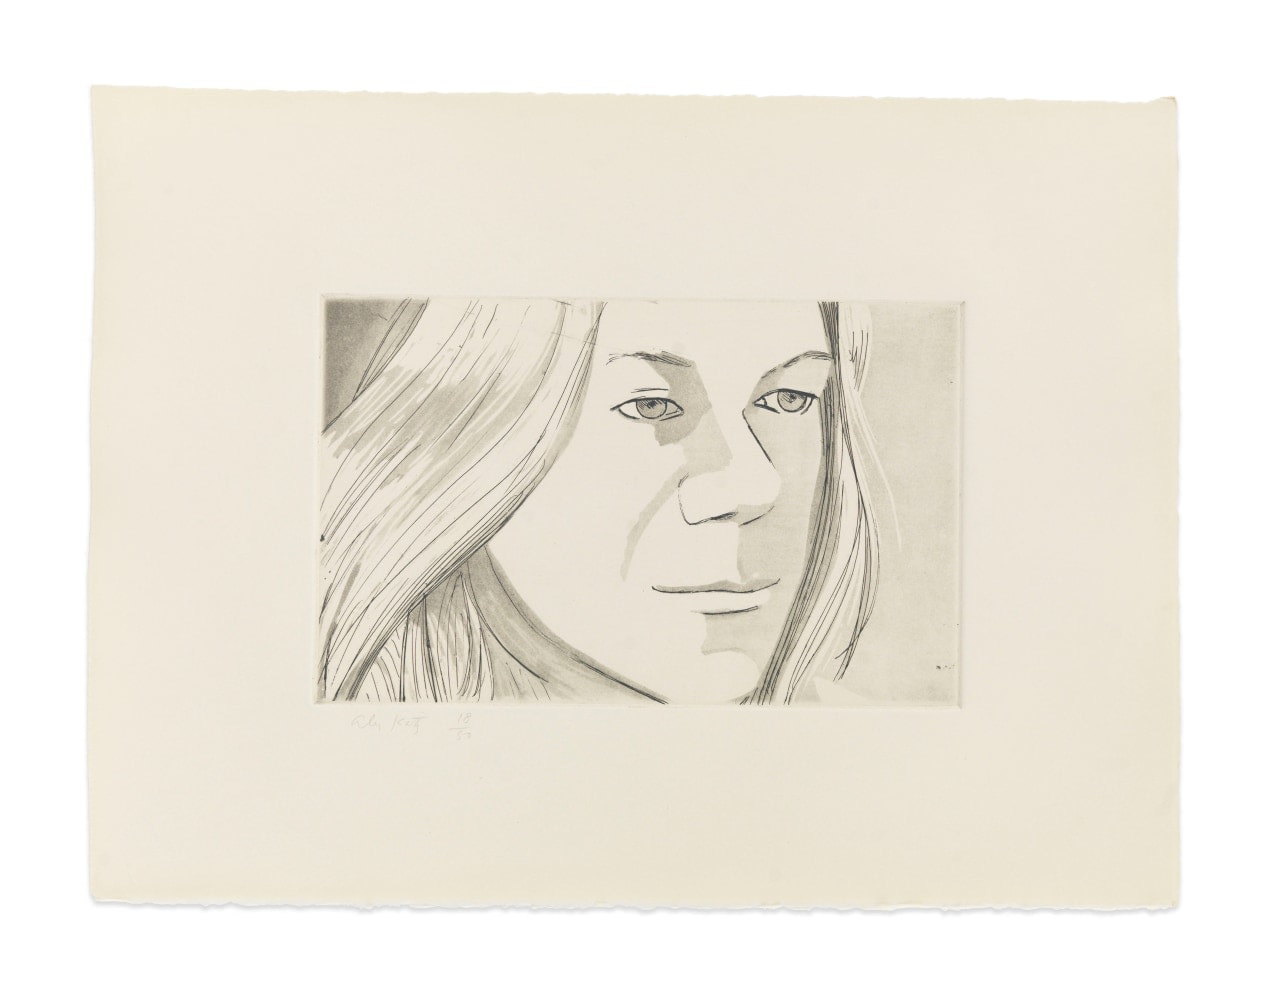 June Ekman&amp;rsquo;s Class: Judy, 1972

aquatint, edition of 50

11 1/8 x 15 in. / 28.3 x 38.1 cm